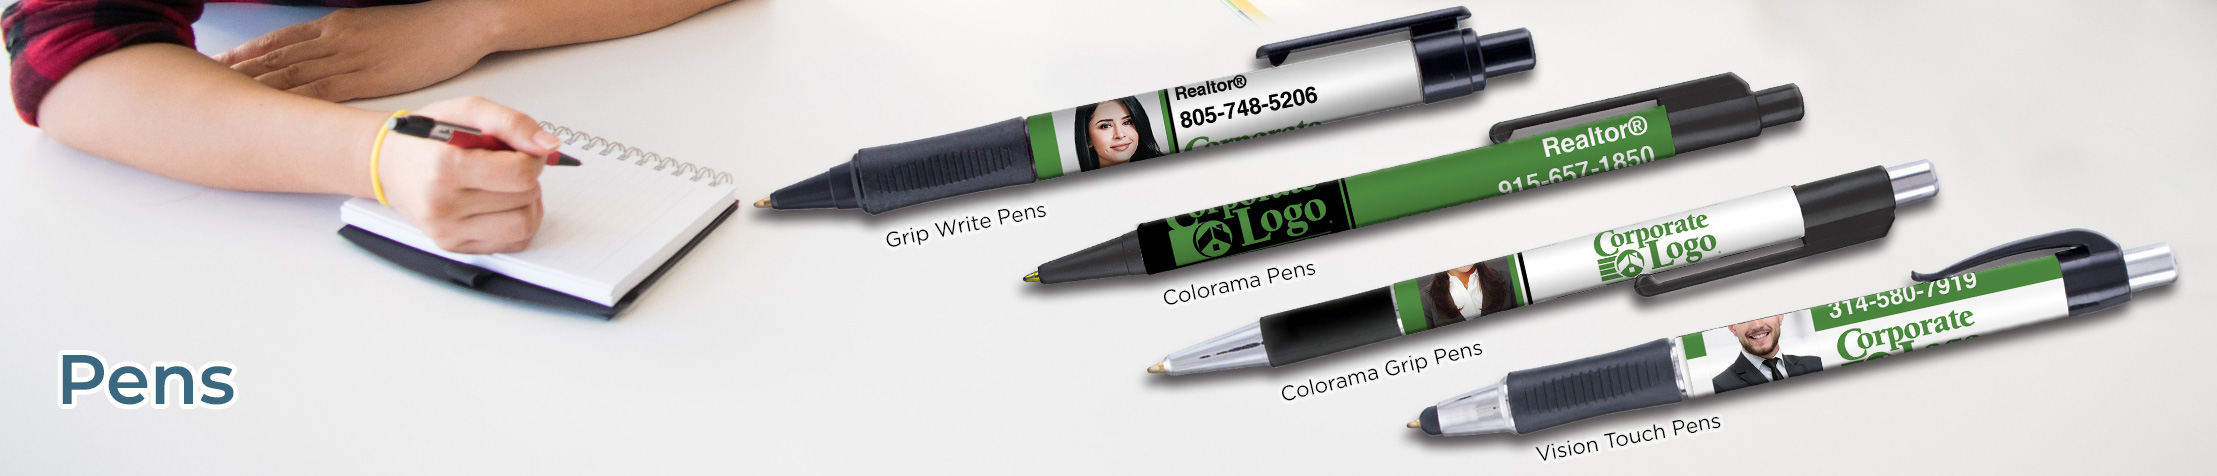 Better Homes and Gardens Real Estate Personalized Pens - promotional products: Grip Write Pens, Colorama Pens, Vision Touch Pens, and Colorama Grip Pens | BestPrintBuy.com